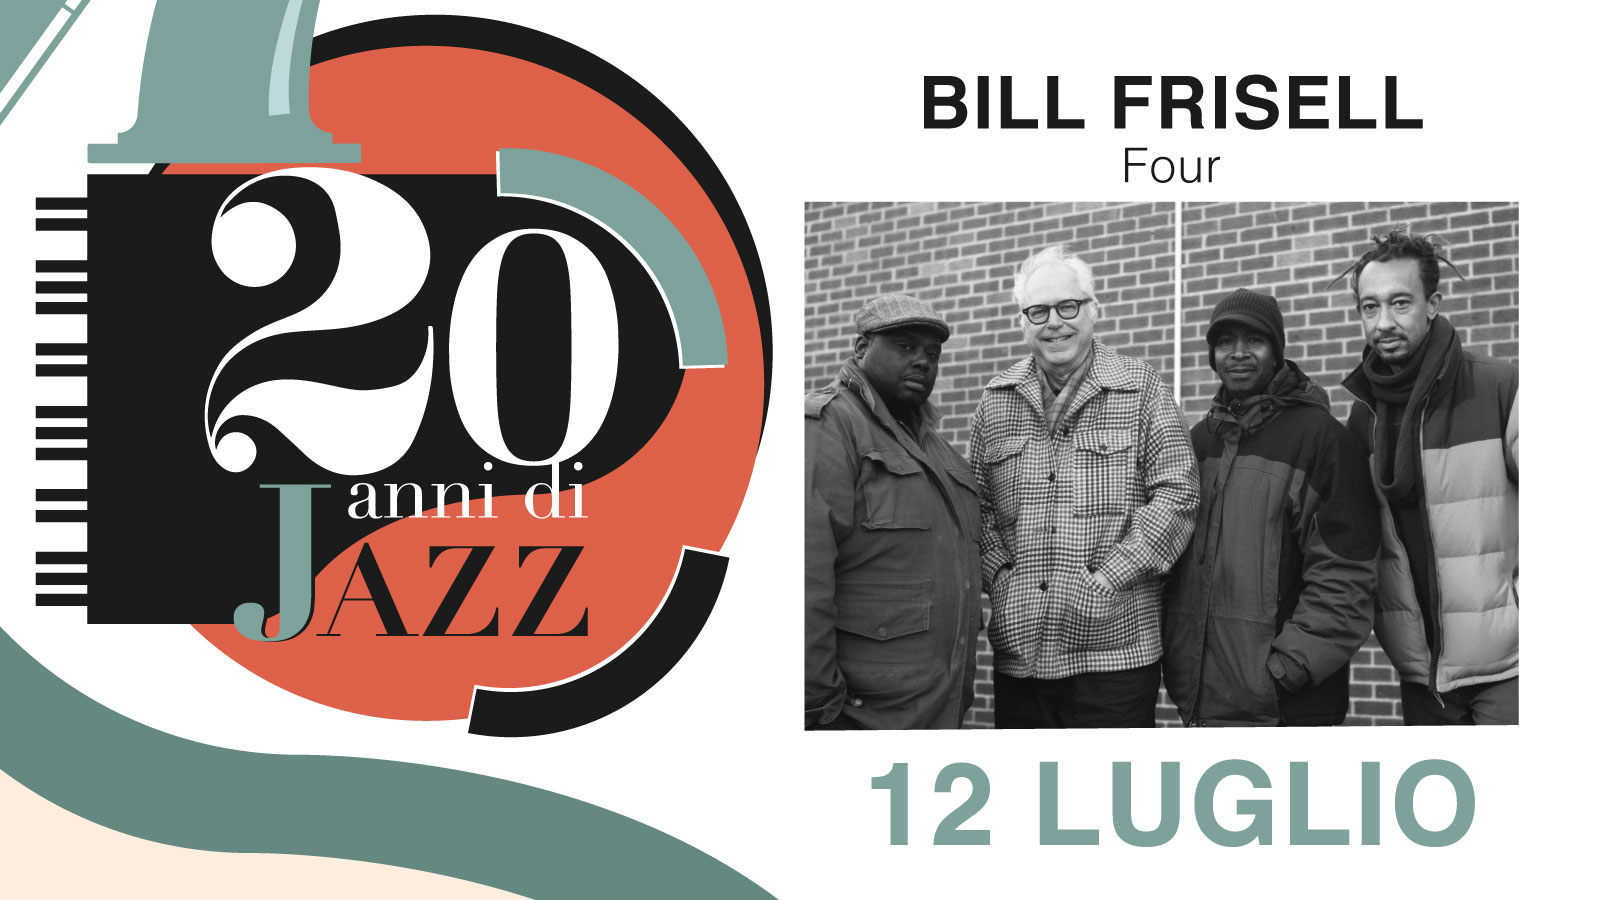 FESTIVAL JAZZONTHEROAD 2023 - BILL FRISELL “FOUR”